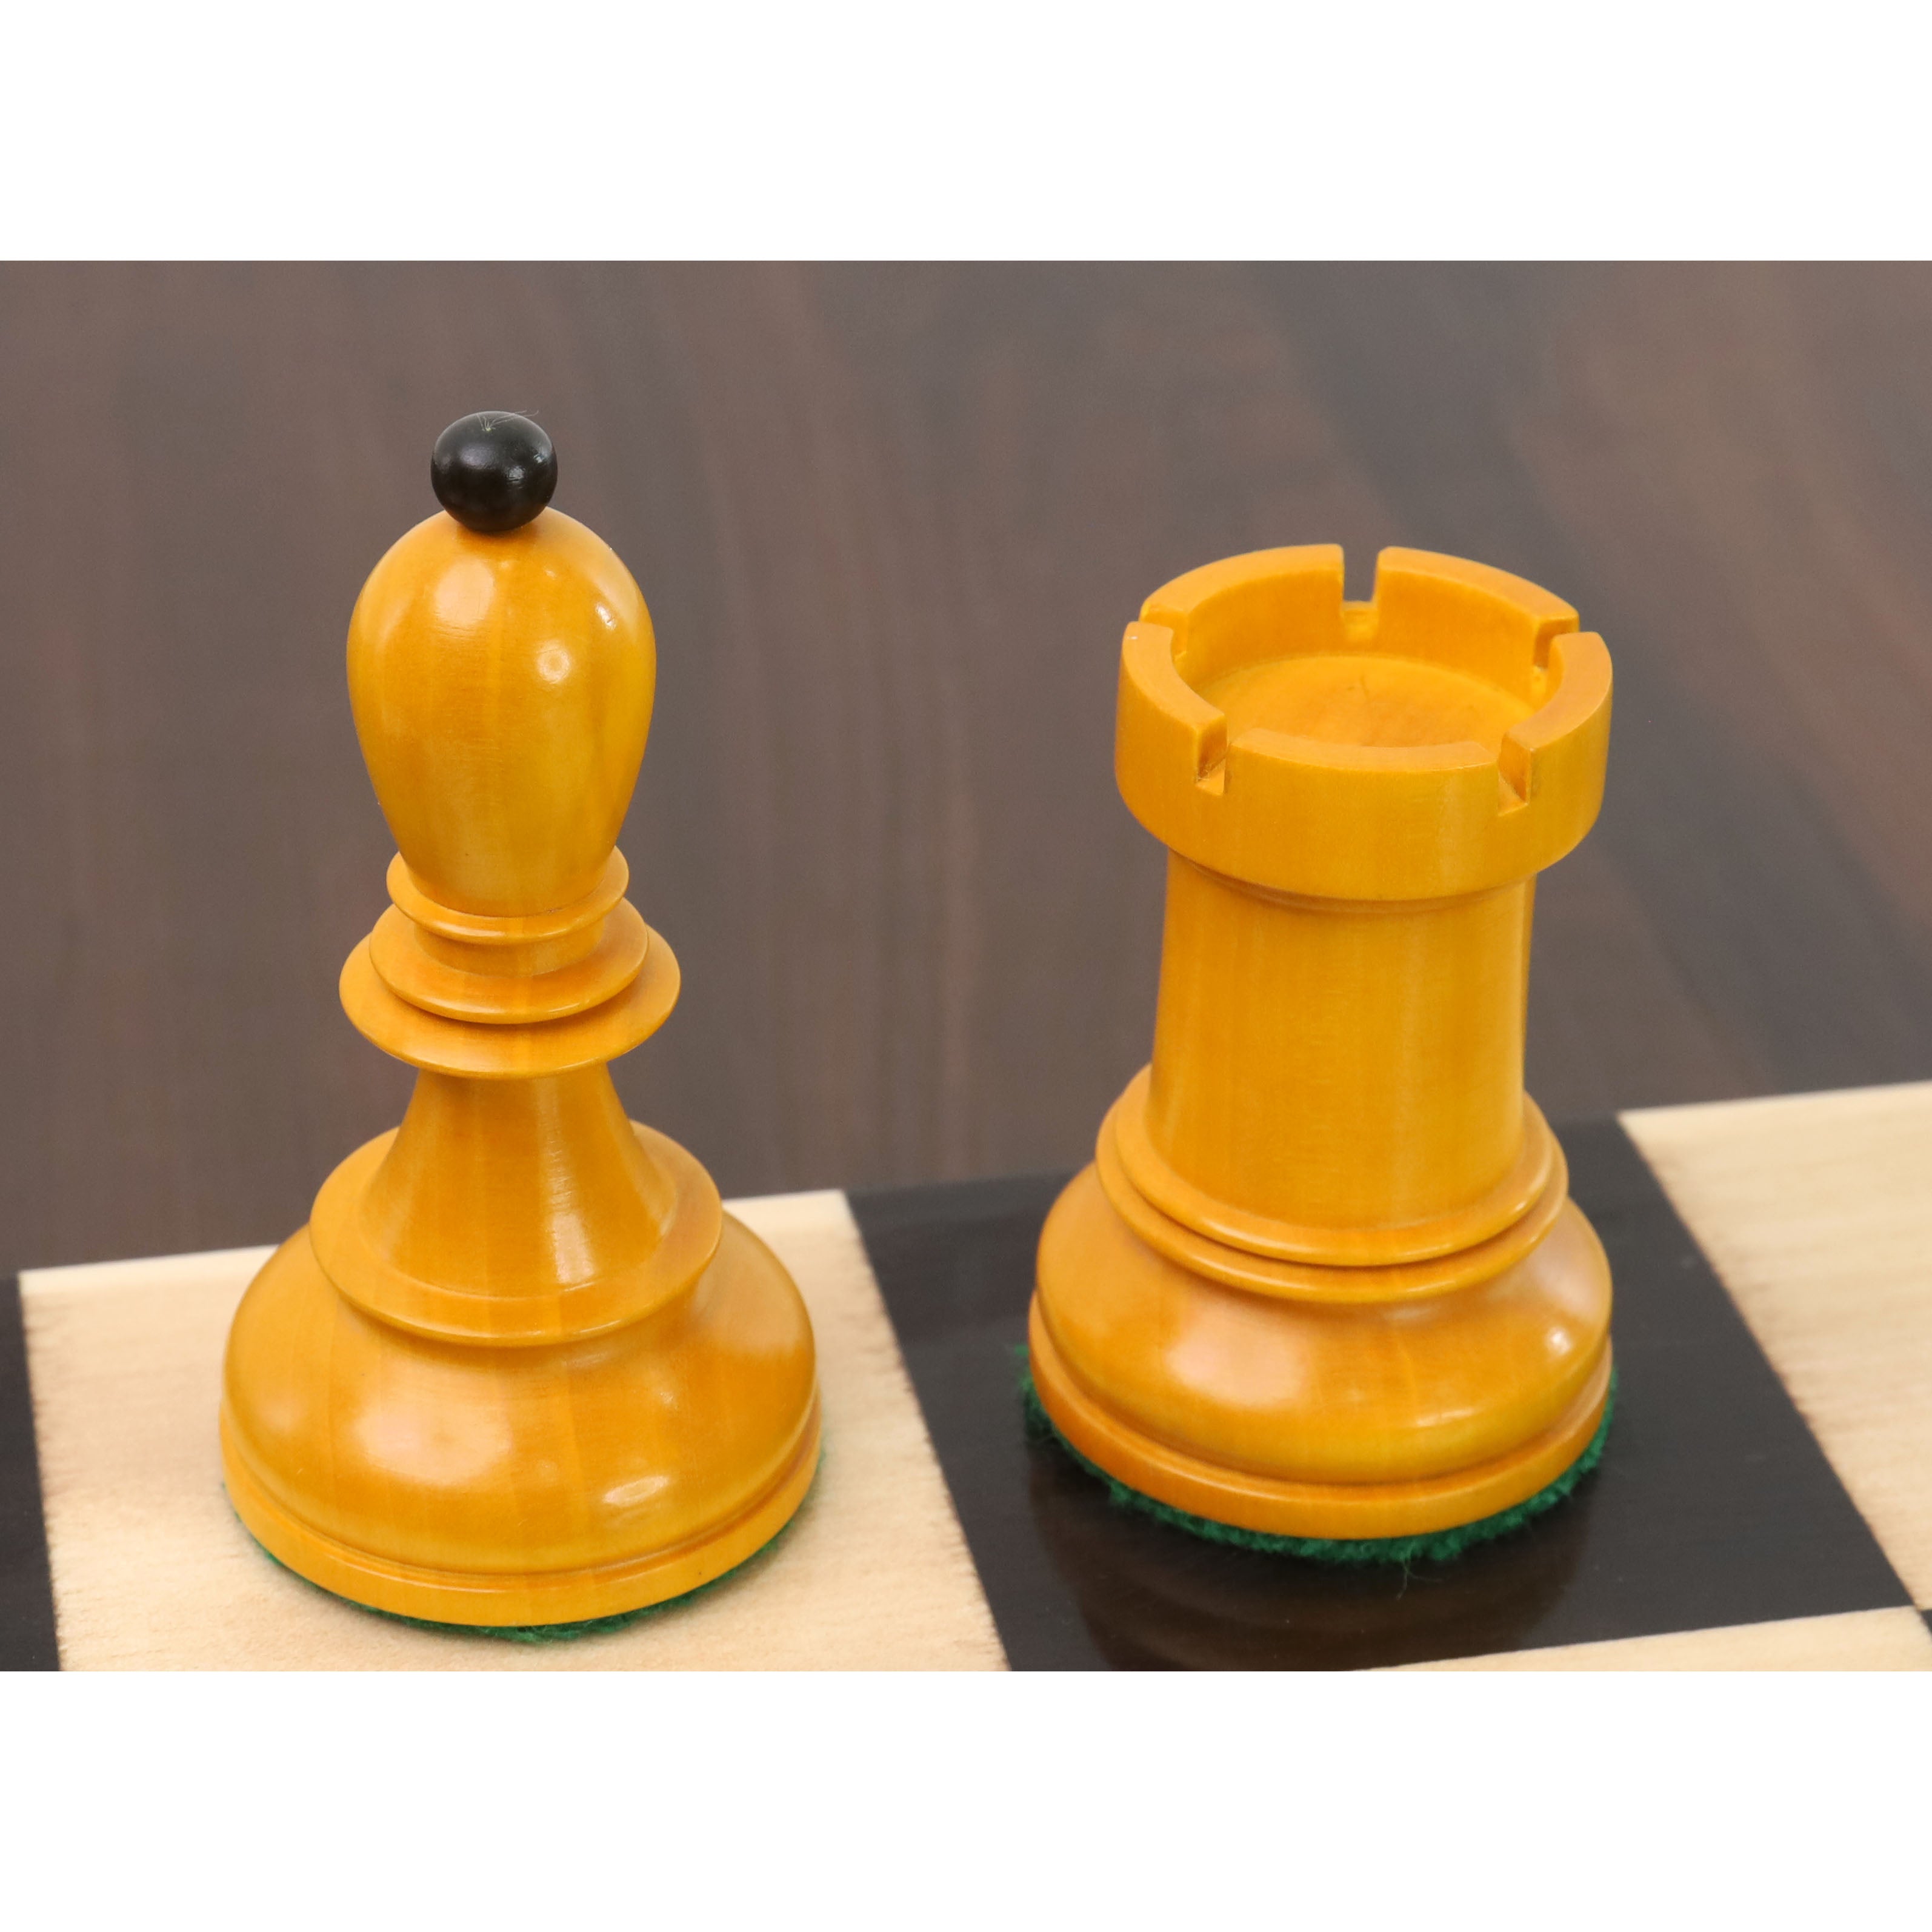 1950s' Fischer Dubrovnik Chess Set- Chess Pieces Only - Antiqued Boxwood - 3.8 " King